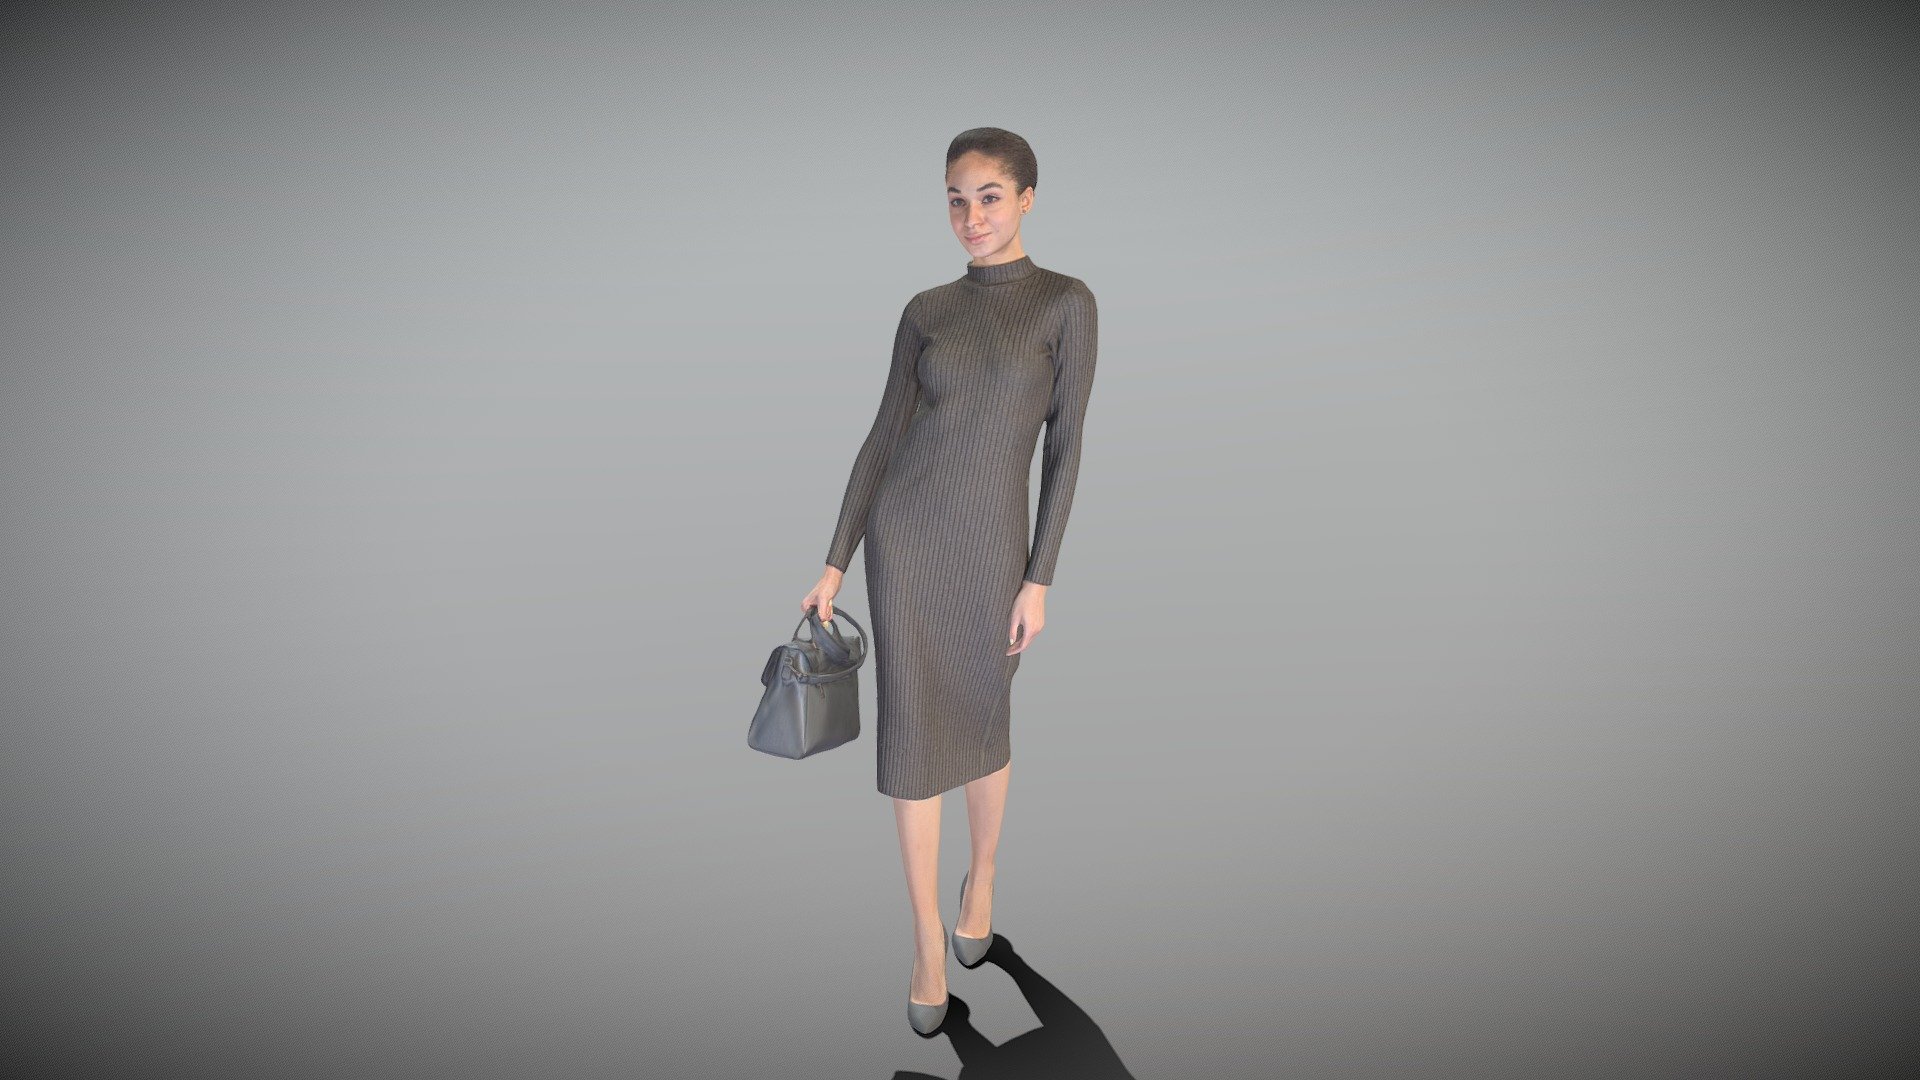 This is a true human size and detailed model of a beautiful young woman of Caucasian appearance dressed in midi black dress. The model is captured in casual pose to be perfectly matching for various architectural, product visualization as a background character within urban installations, city designs, outdoor design presentations, VR/AR content, etc.

Technical specifications:




digital double 3d scan model

150k &amp; 30k triangles | double triangulated

high-poly model (.ztl tool with 5 subdivisions) clean and retopologized automatically via ZRemesher

sufficiently clean

PBR textures 8K resolution: Diffuse, Normal, Specular maps

non-overlapping UV map

no extra plugins are required for this model

Download package includes a Cinema 4D project file with Redshift shader, OBJ, FBX, STL files, which are applicable for 3ds Max, Maya, Unreal Engine, Unity, Blender, etc. All the textures you will find in the “Tex” folder, included into the main archive.

3D EVERYTHING

Stand with Ukraine! - Elegant young woman in black dress 443 - Buy Royalty Free 3D model by deep3dstudio 3d model